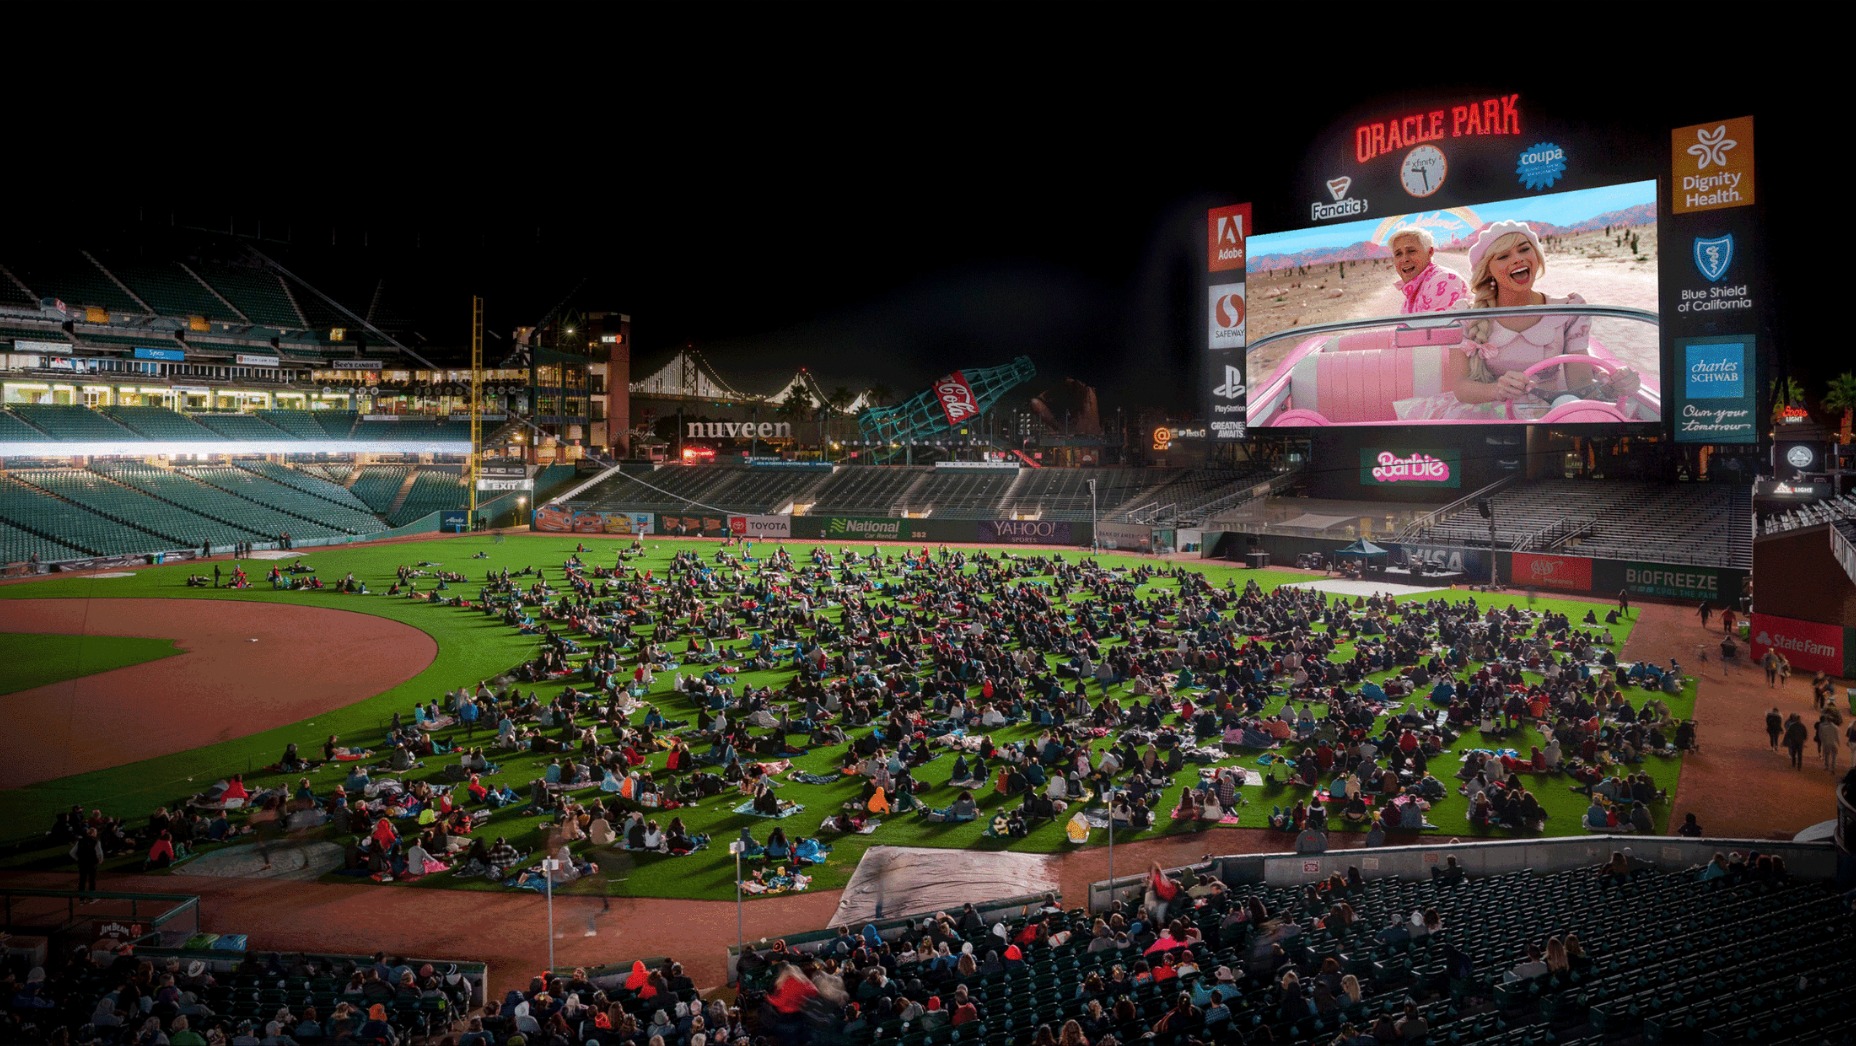 A screening of this year's hit movie "Barbie" is set for Oracle Park this upcoming Halloween weekend, with tickets going on sale Monday.